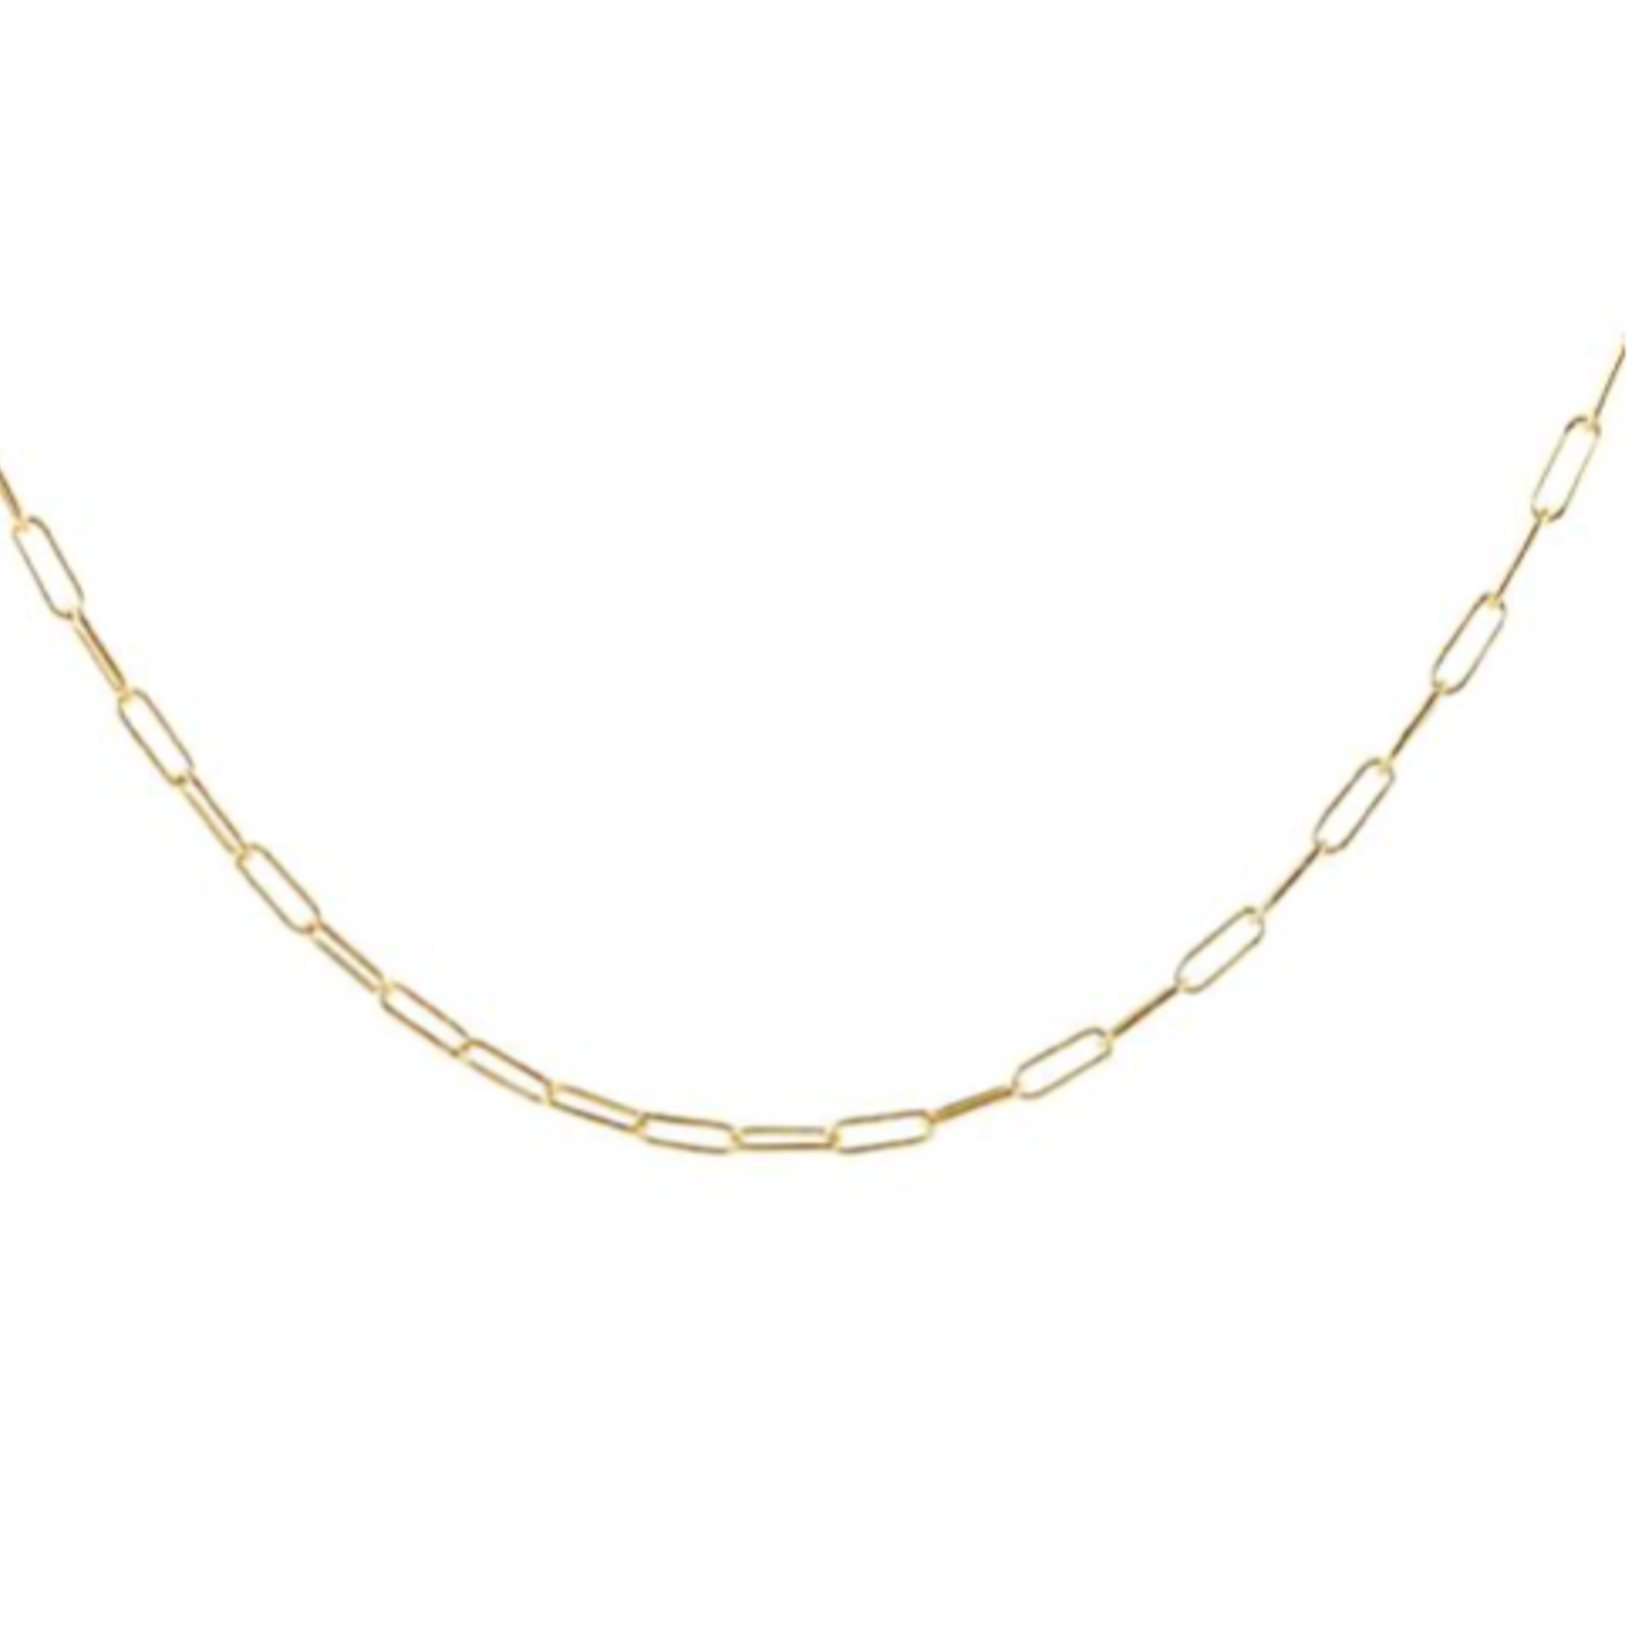 KRIS NATIONS Thin Drawn Cable Chain Necklace-18K Gold Vermeil